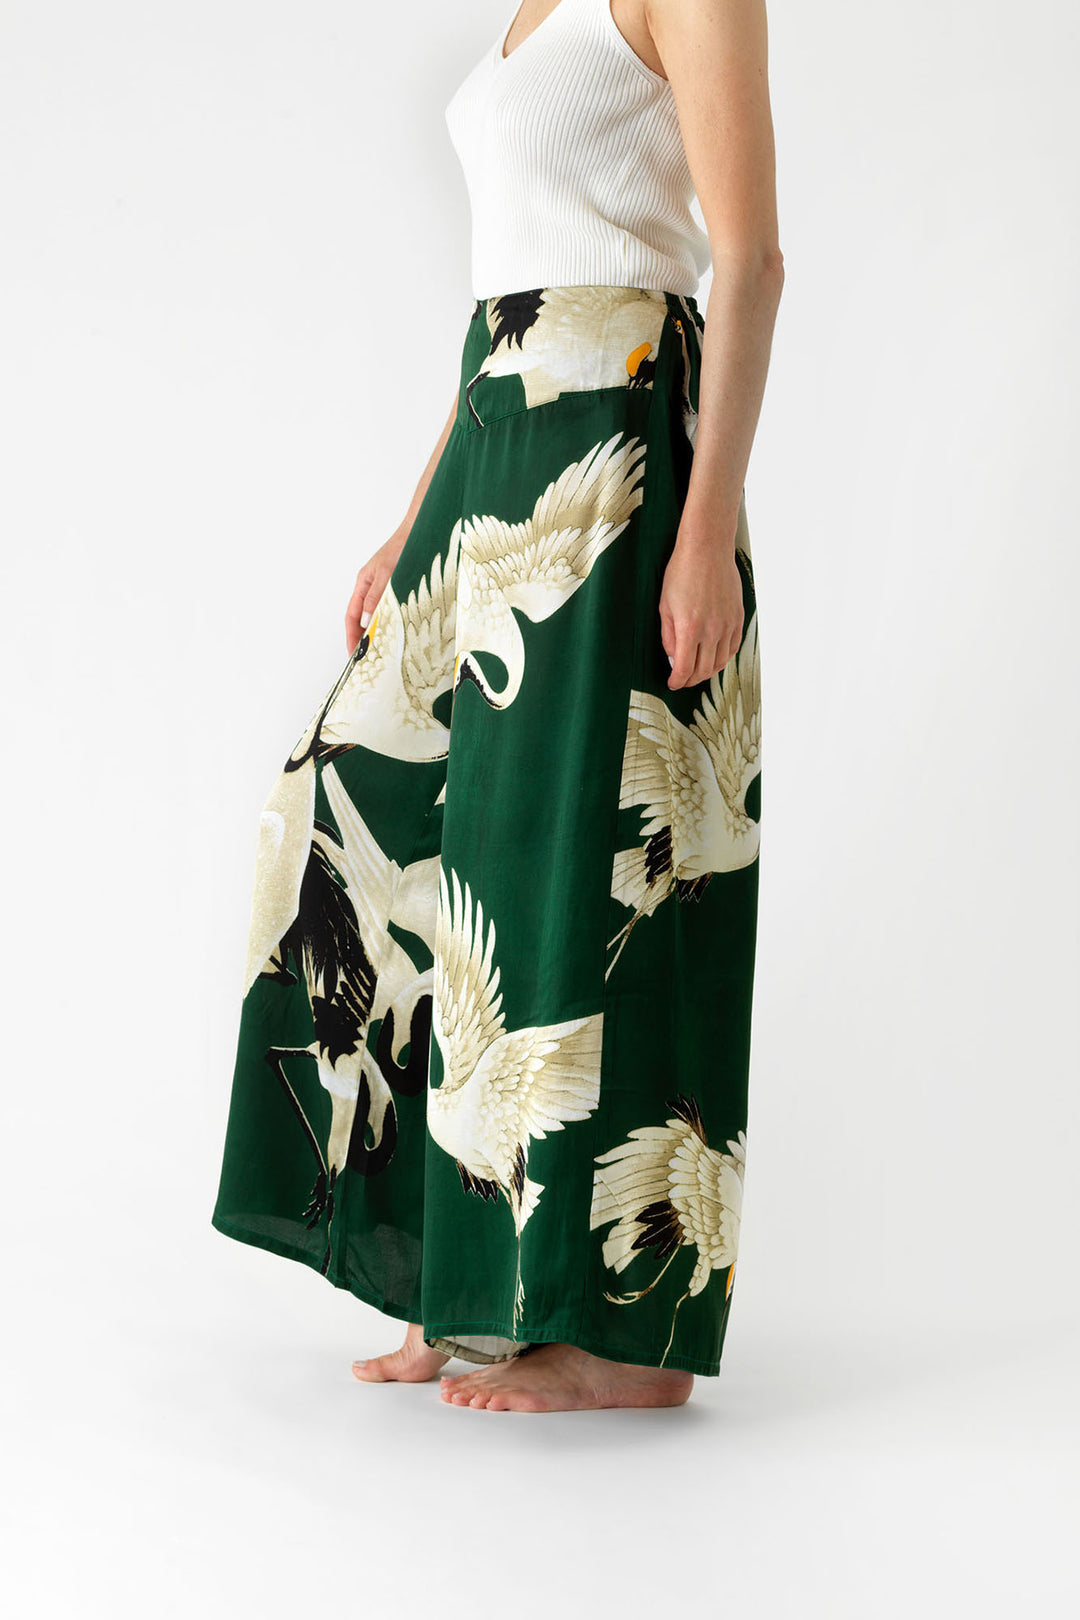 ladies satin palazzo pants green background with stork bird print by One Hundred Stars